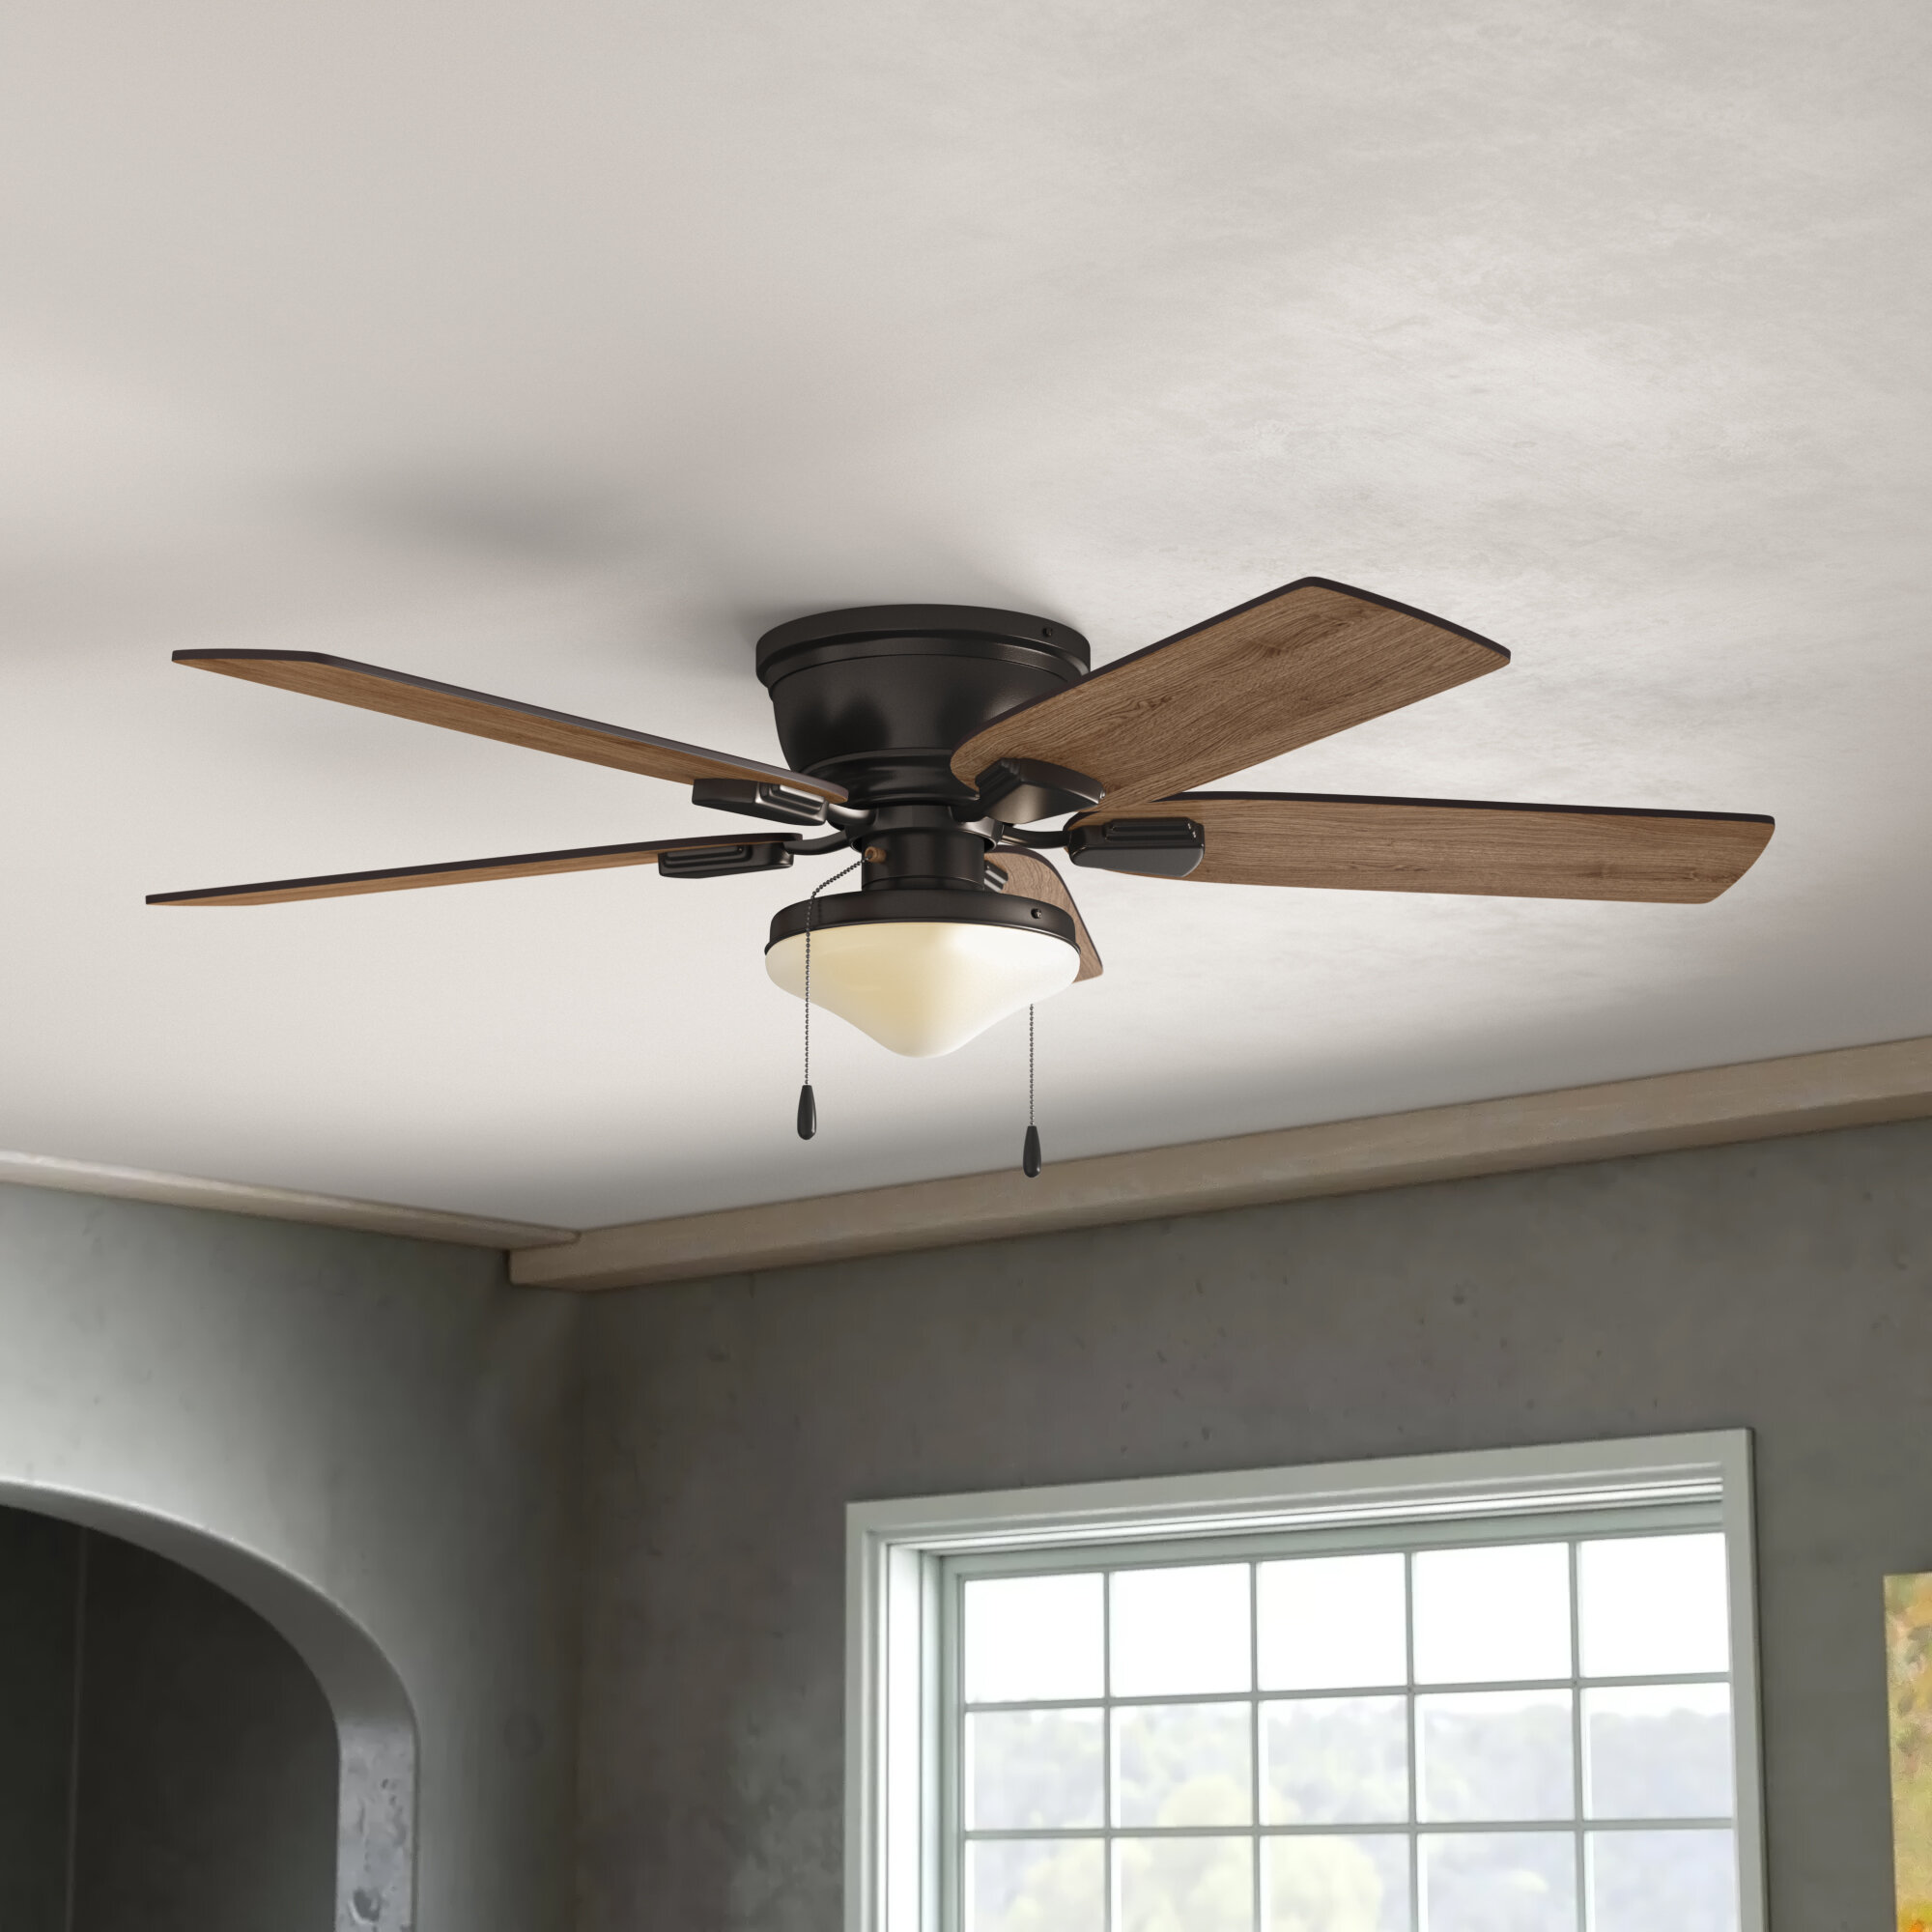 Gracie Oaks 52 Hinesville 5 Blade Flush Mount Ceiling Fan With Pull Chain And Light Kit Included Wayfair